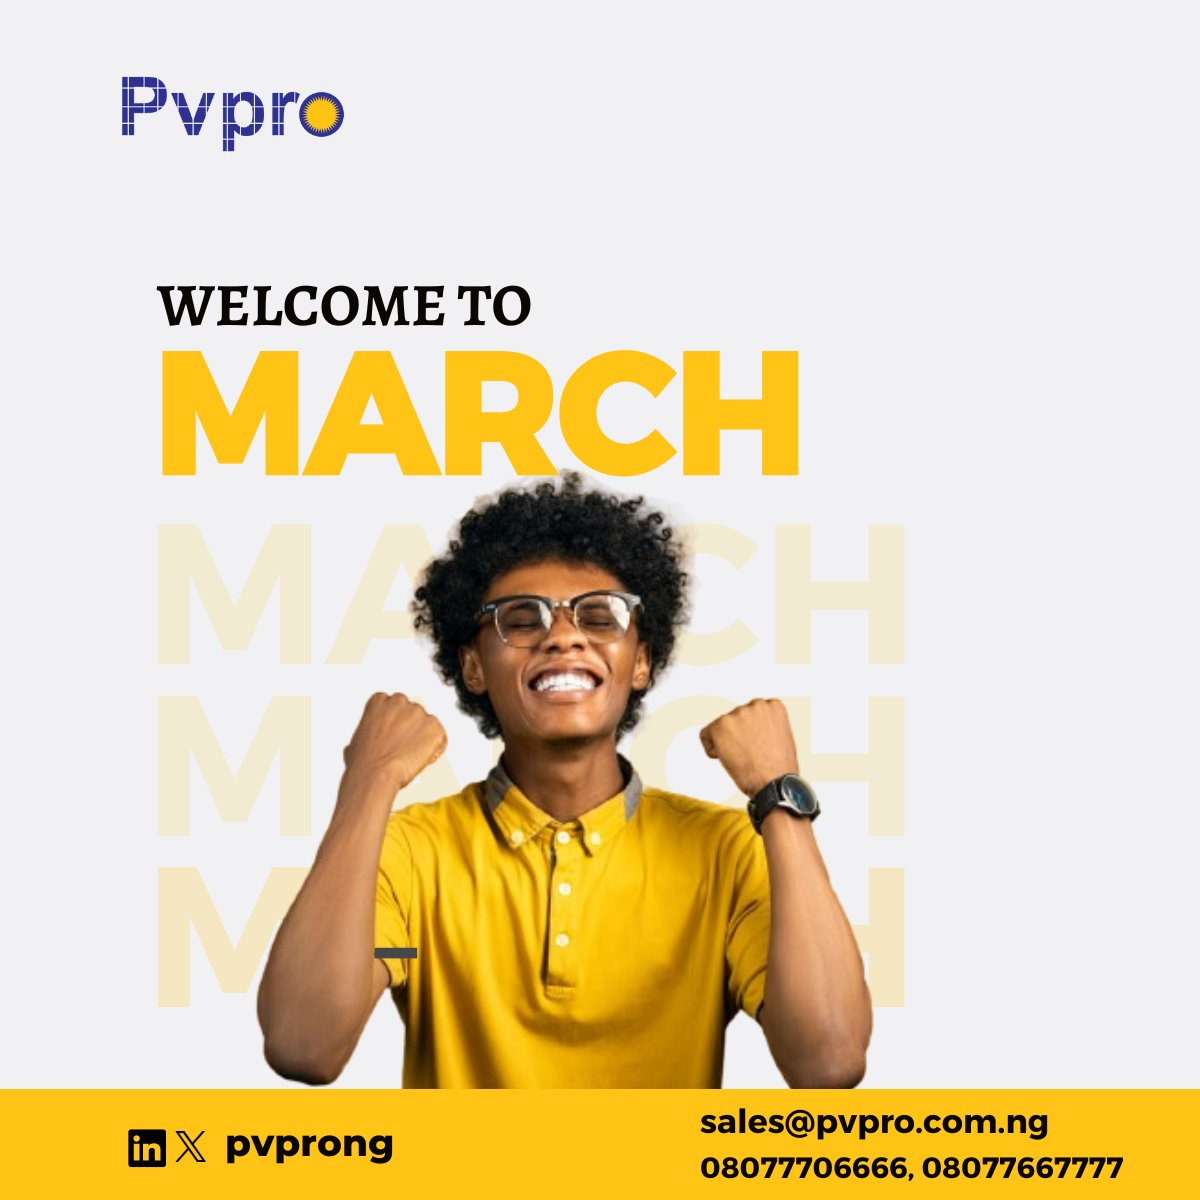 Happy New Month! 🎊 

Welcome to the month of March and here's us wishing you a beautiful month filled with outstanding breakthroughs and unforgettable experiences.

Make every moment count! 
#newmonth Lagos  #march Enugu  #pvpro Imo #renewableenergysolutions abia